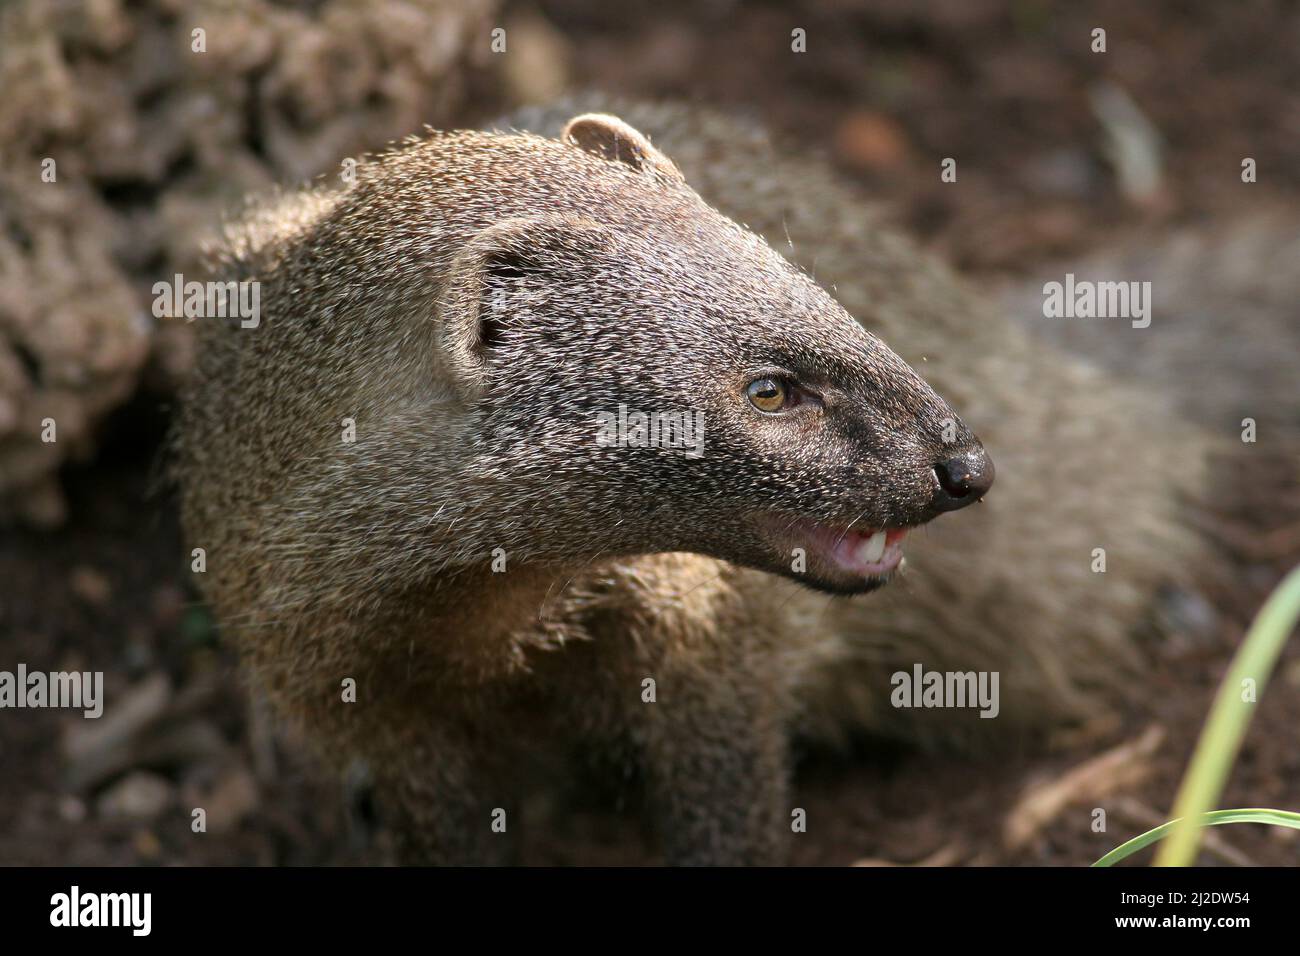 Egyptian Mongoose (Herpestes ichneumon), Photographed in Israel in March Stock Photo